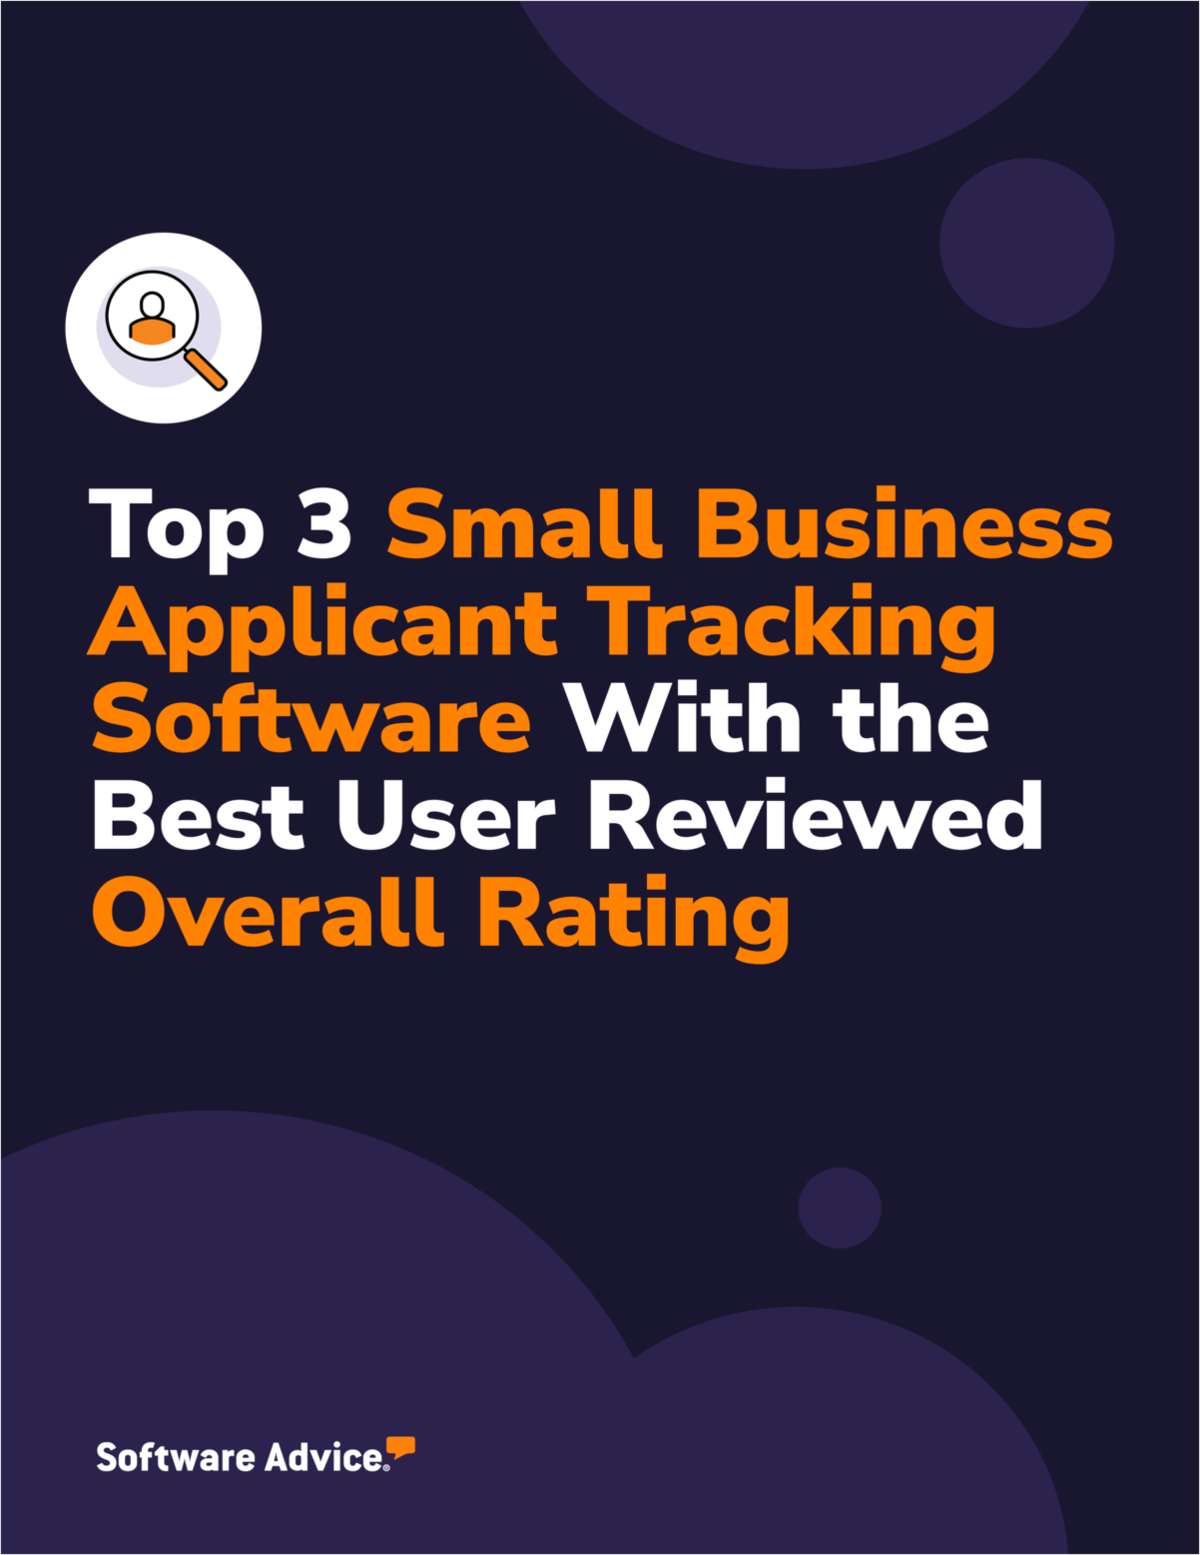 Top 3 Small Business Applicant Tracking Software With the Best User Reviewed Overall Rating